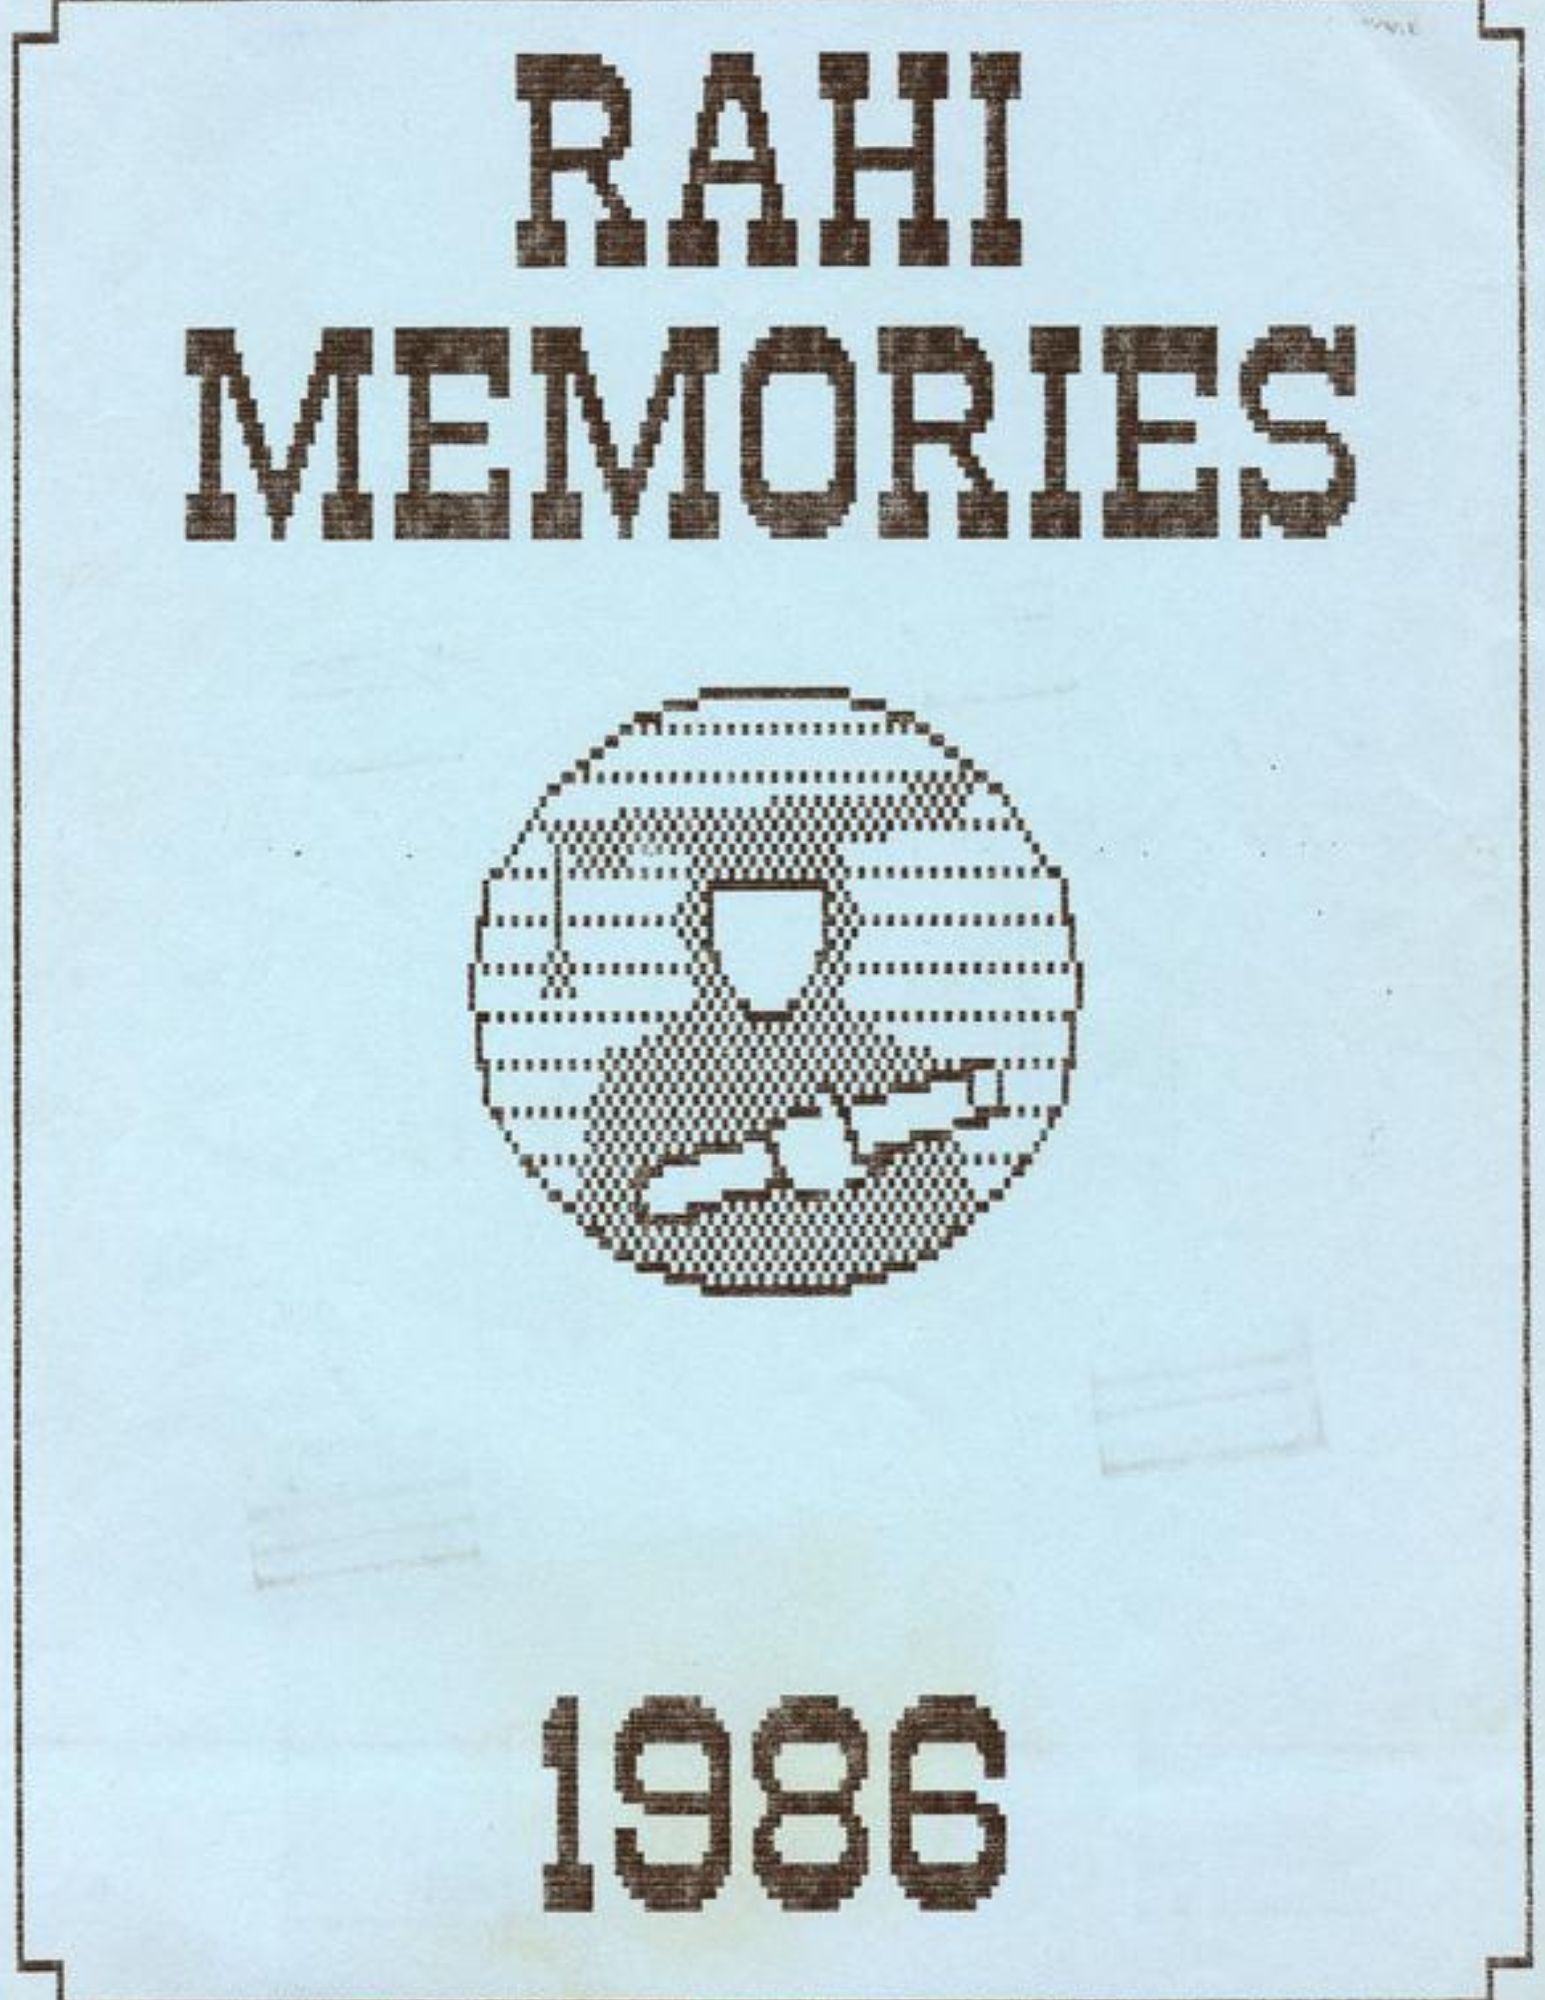 1986 Yearbook Cover